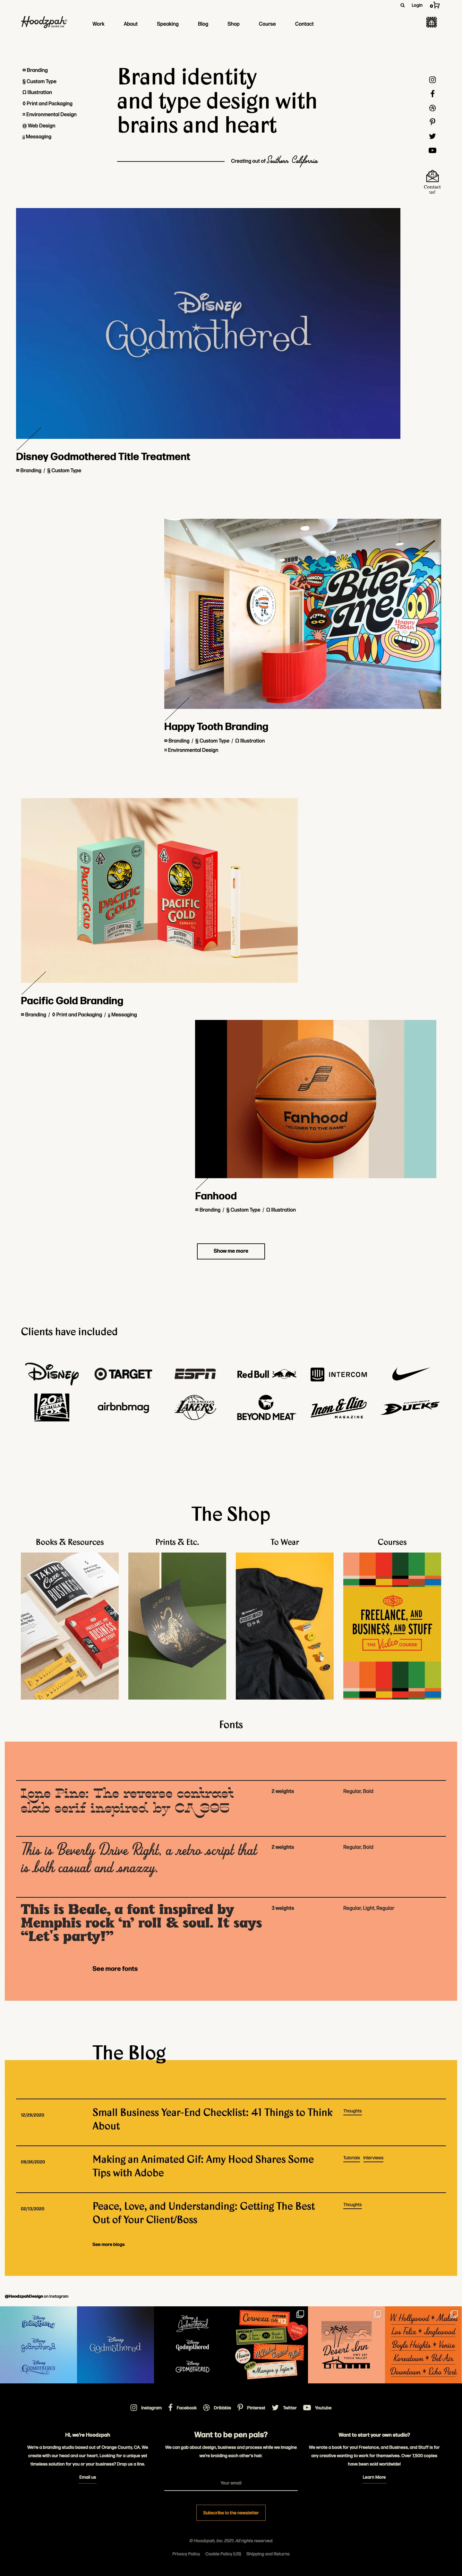 Hoodzpah Landing Page Example: A brand identity and type design studio based out of Southern California.